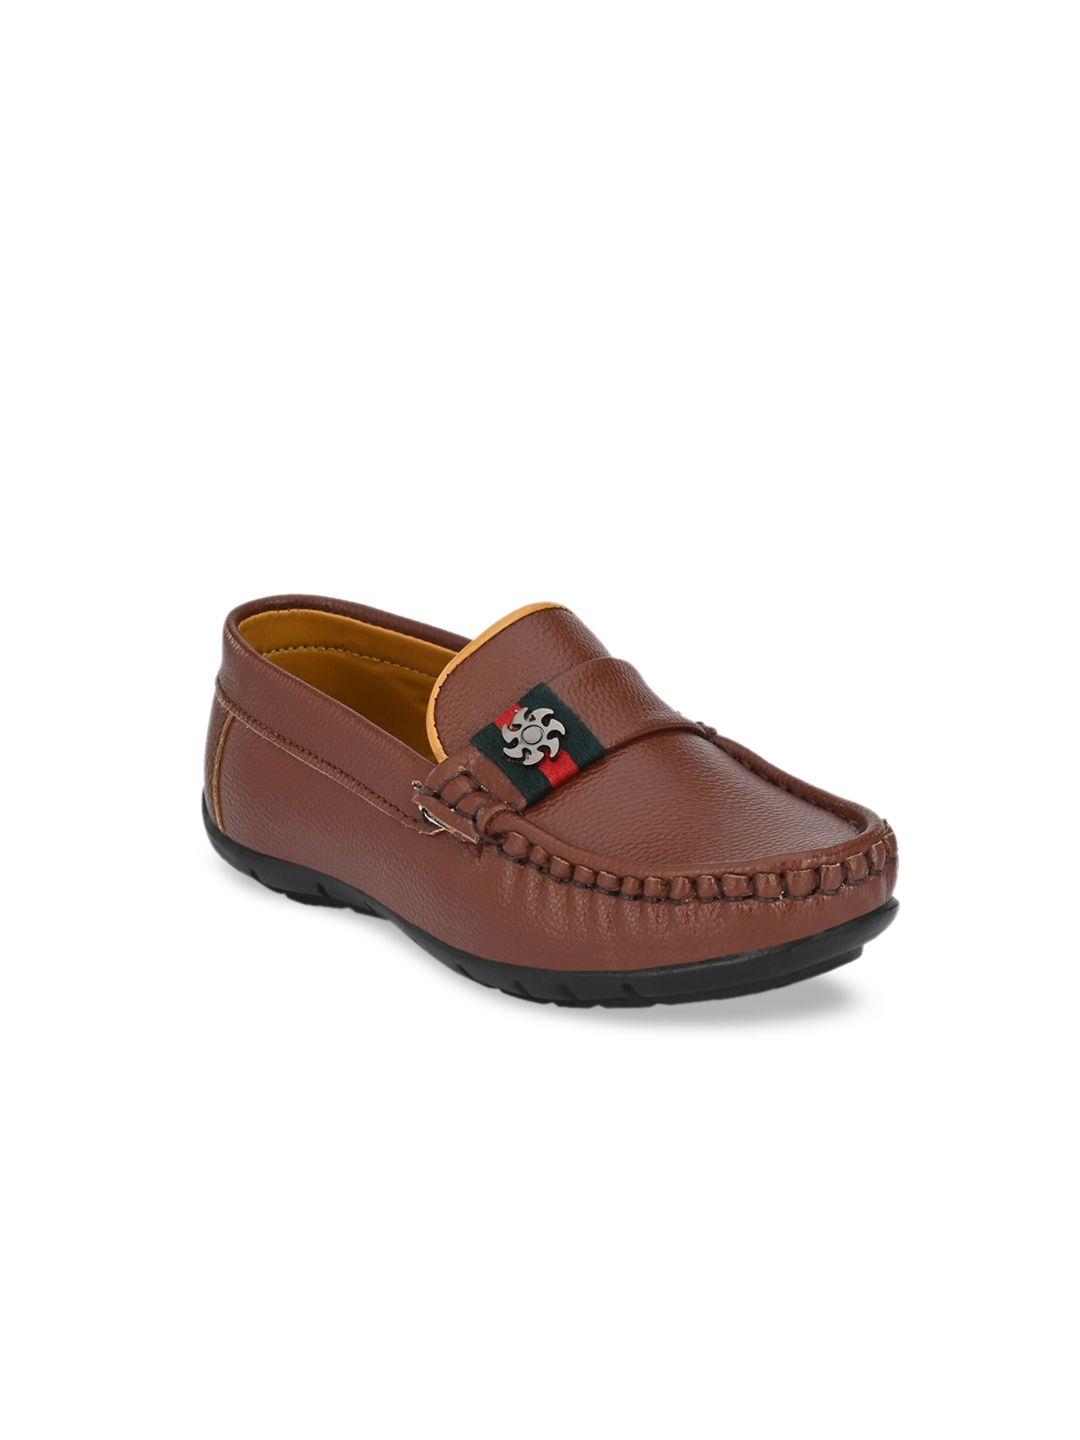 tuskey boys brown loafers